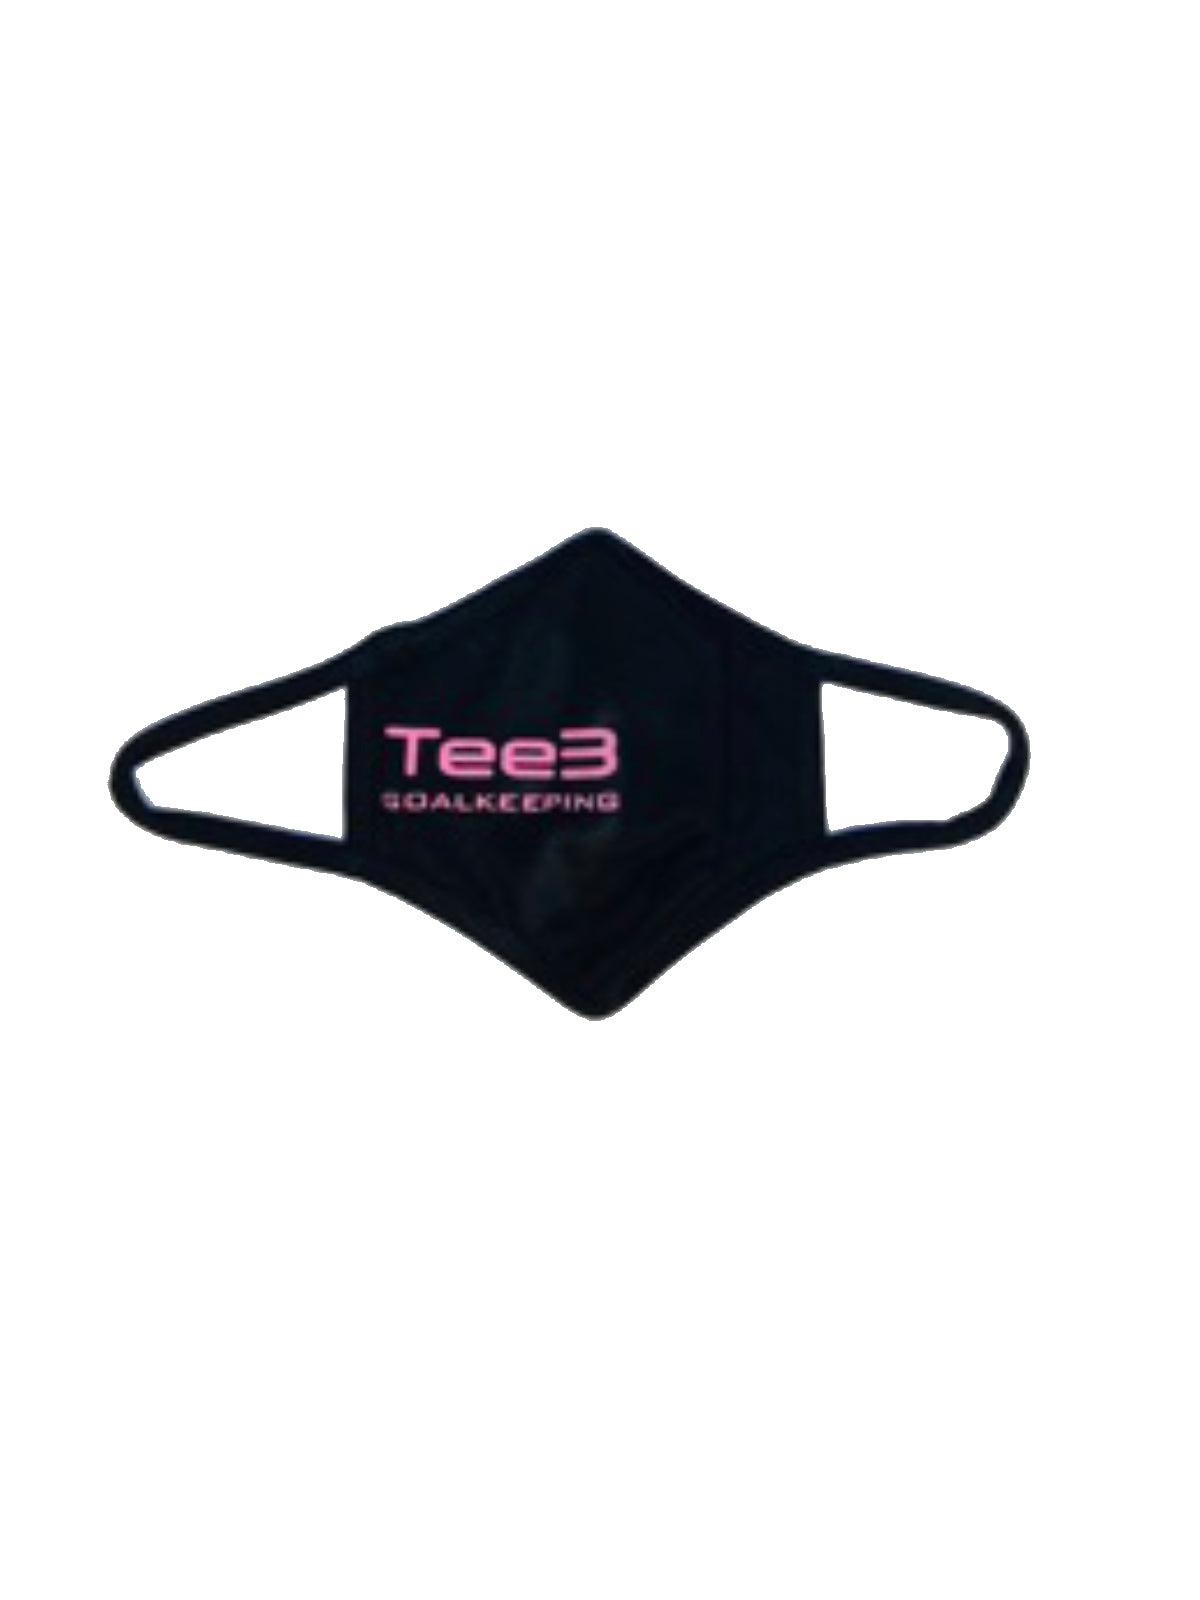 Tee3 Face Mask - Baby Pink